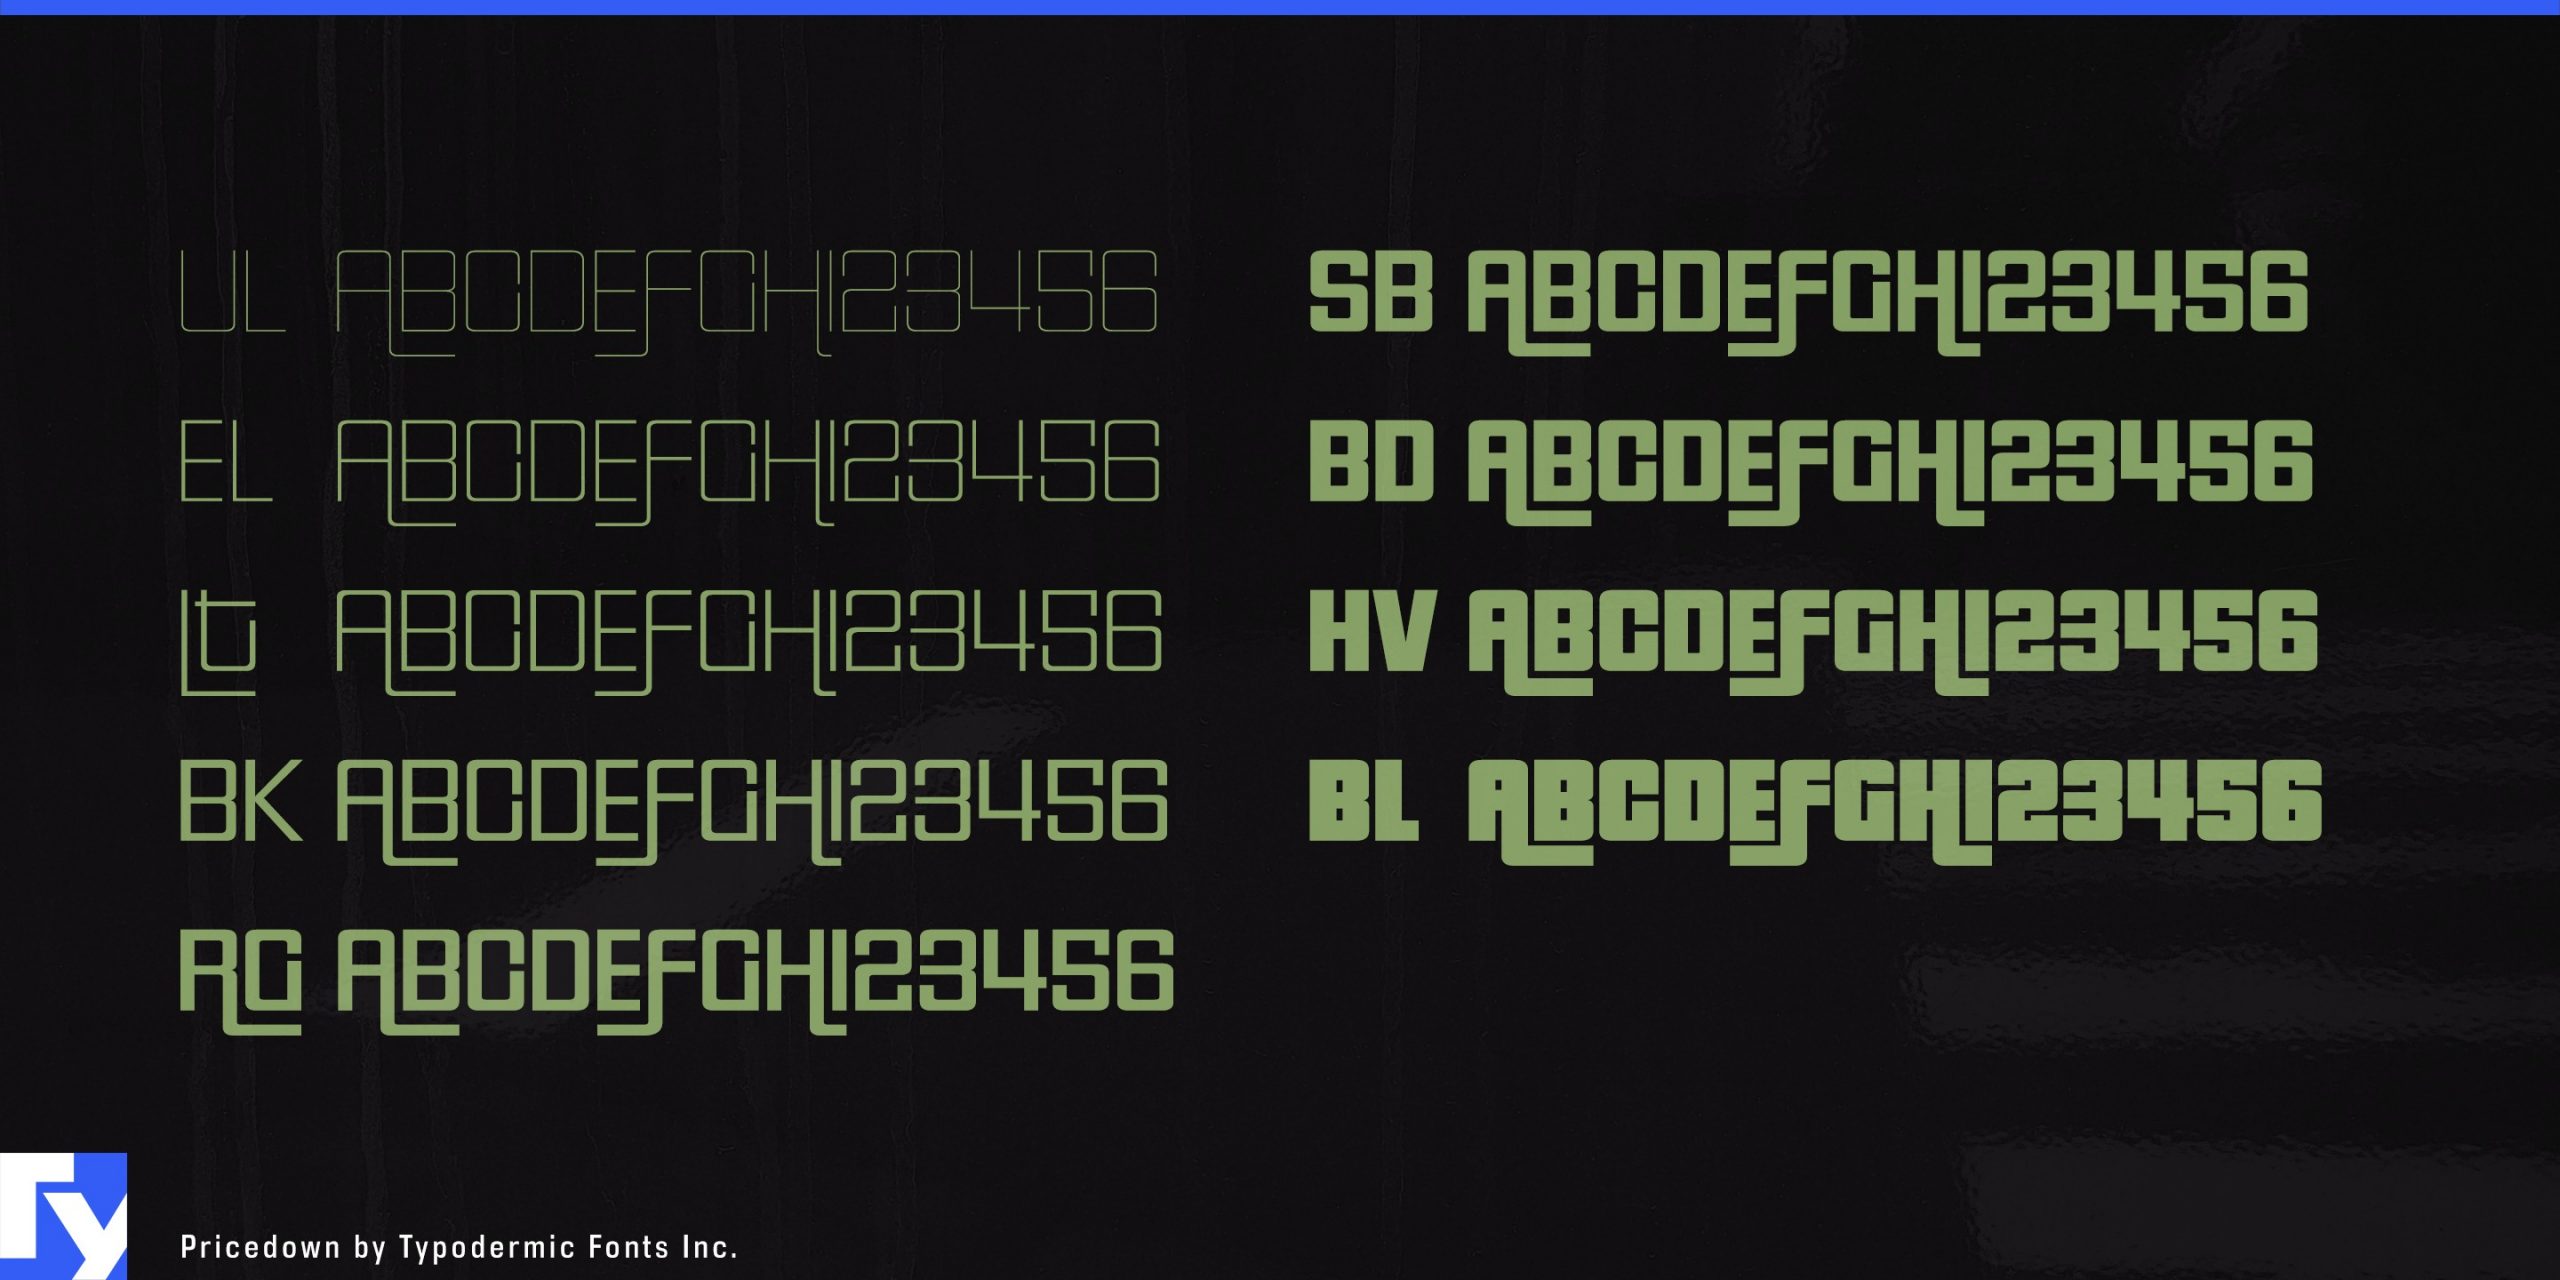 Versatile Attenuation: Unveiling the Range of Weights in Pricedown Font